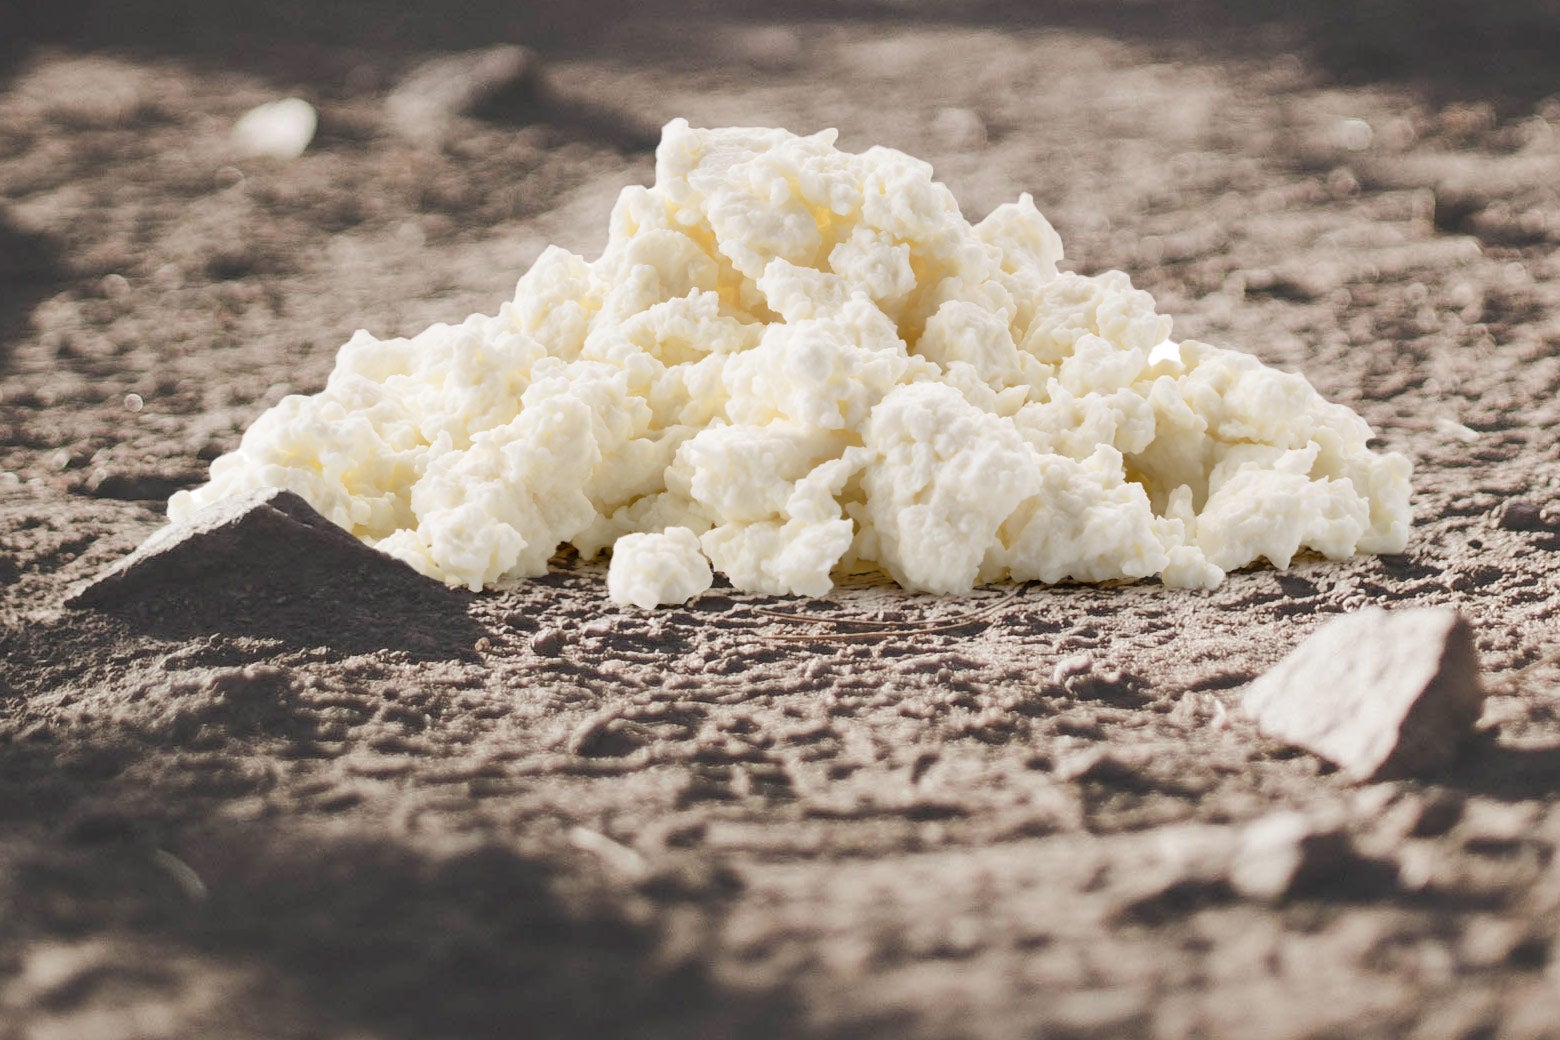 Cottage cheese sits atop dirt.